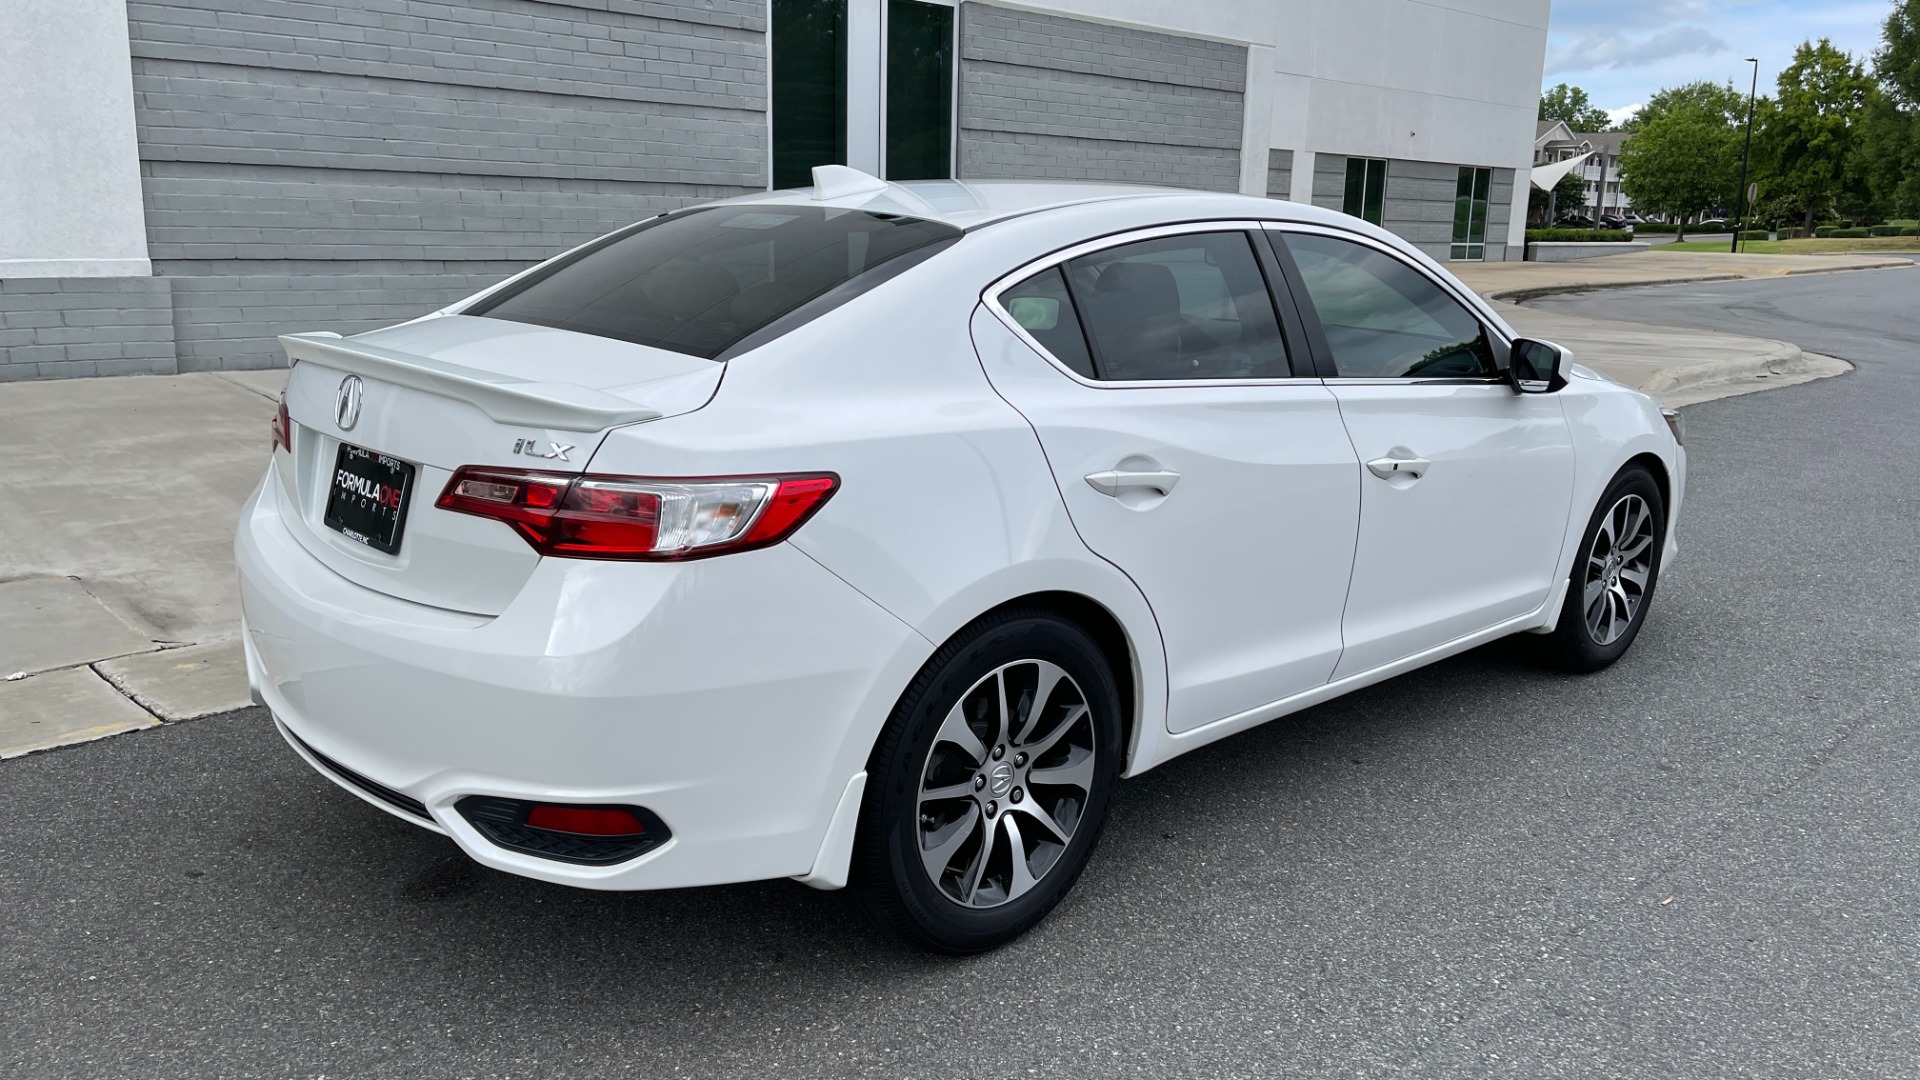 Used 2016 Acura ILX 4DR SEDAN / 2.4L I4 / FWD / STREAMING AUDIO / SUNROOF / REARVIEW for sale Sold at Formula Imports in Charlotte NC 28227 2